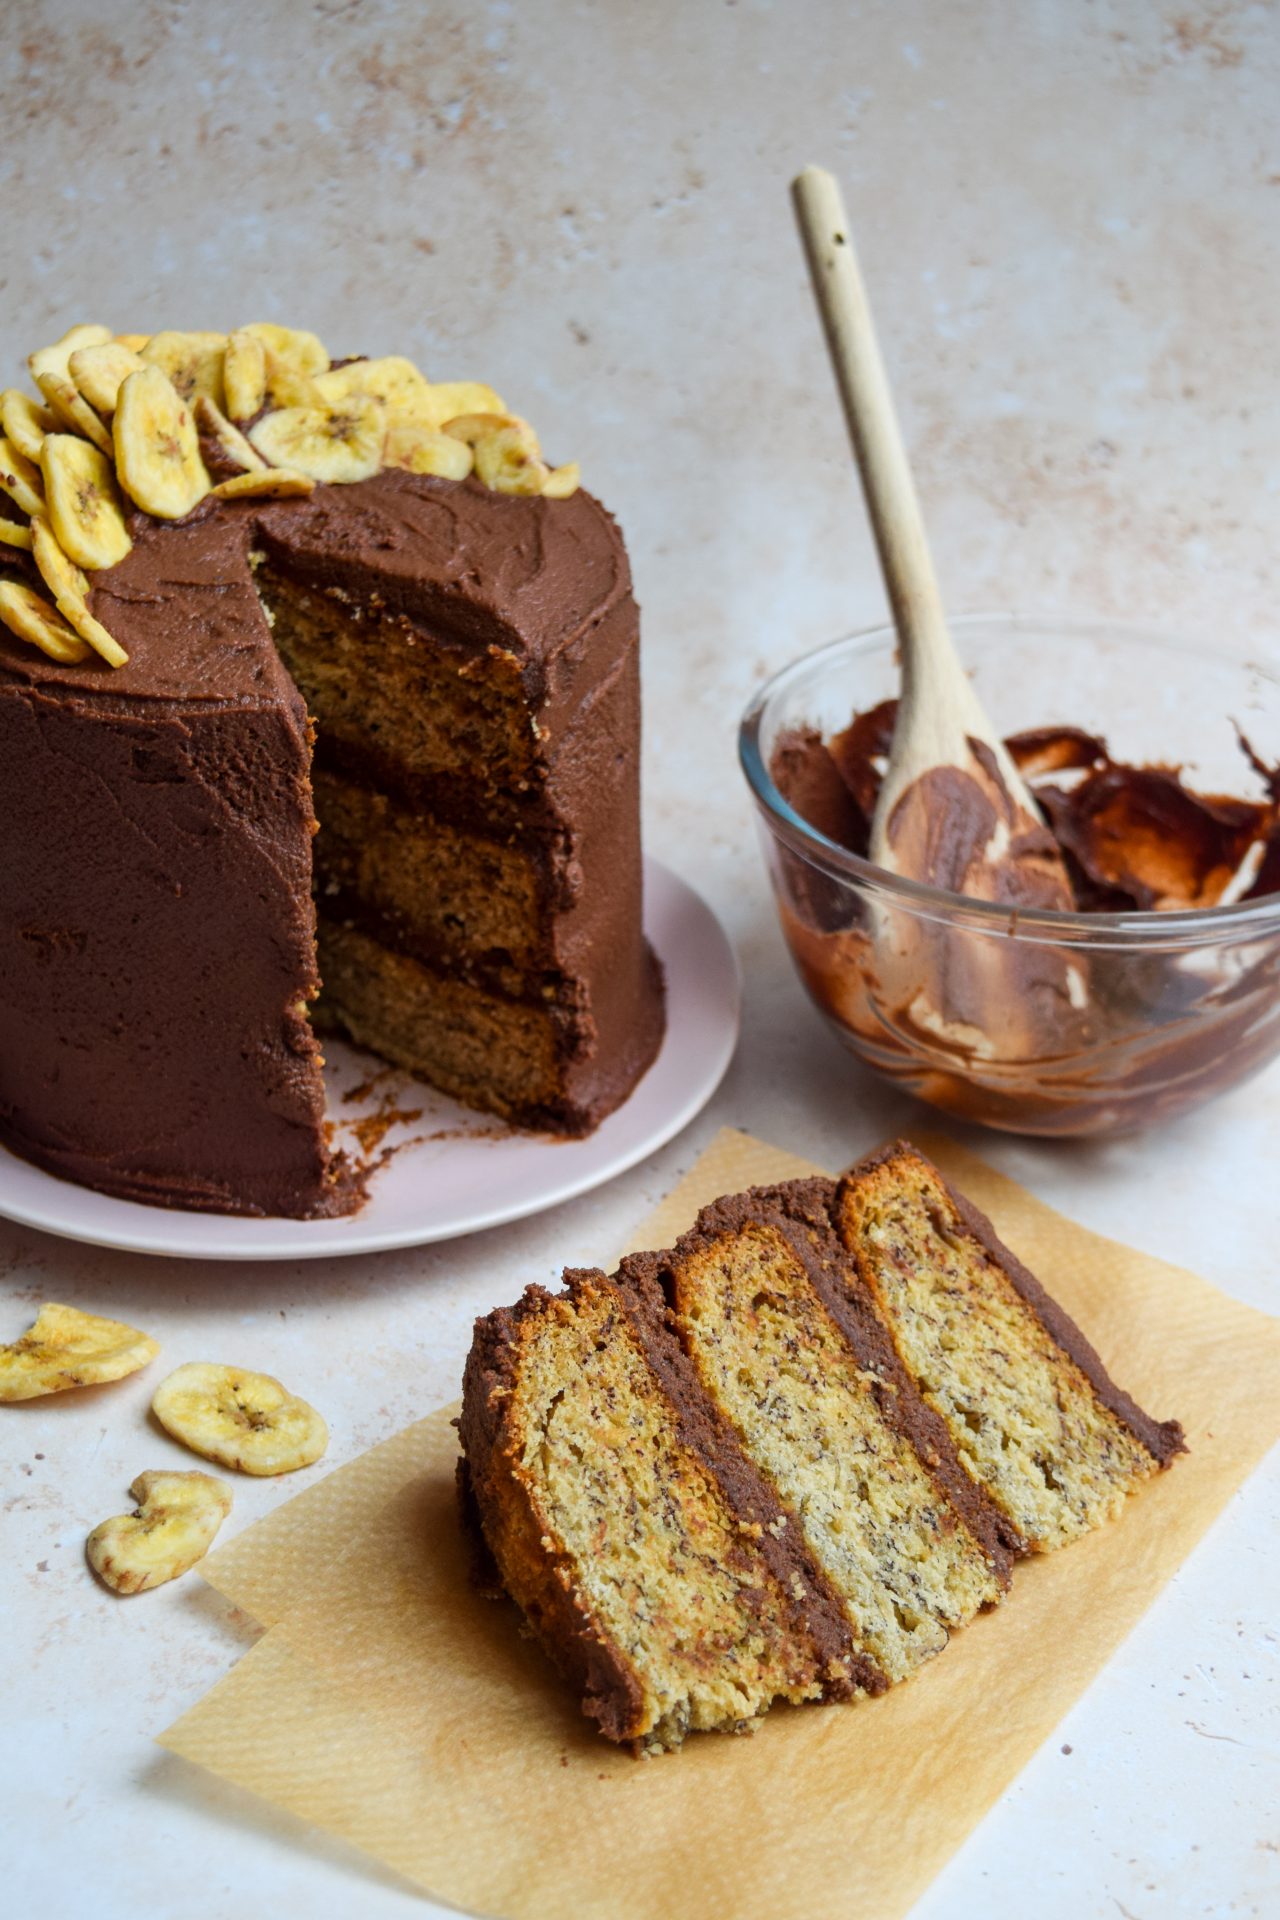 Banana-Chocolate Chip Cake With Peanut Butter Frosting Recipe | Bon Appétit